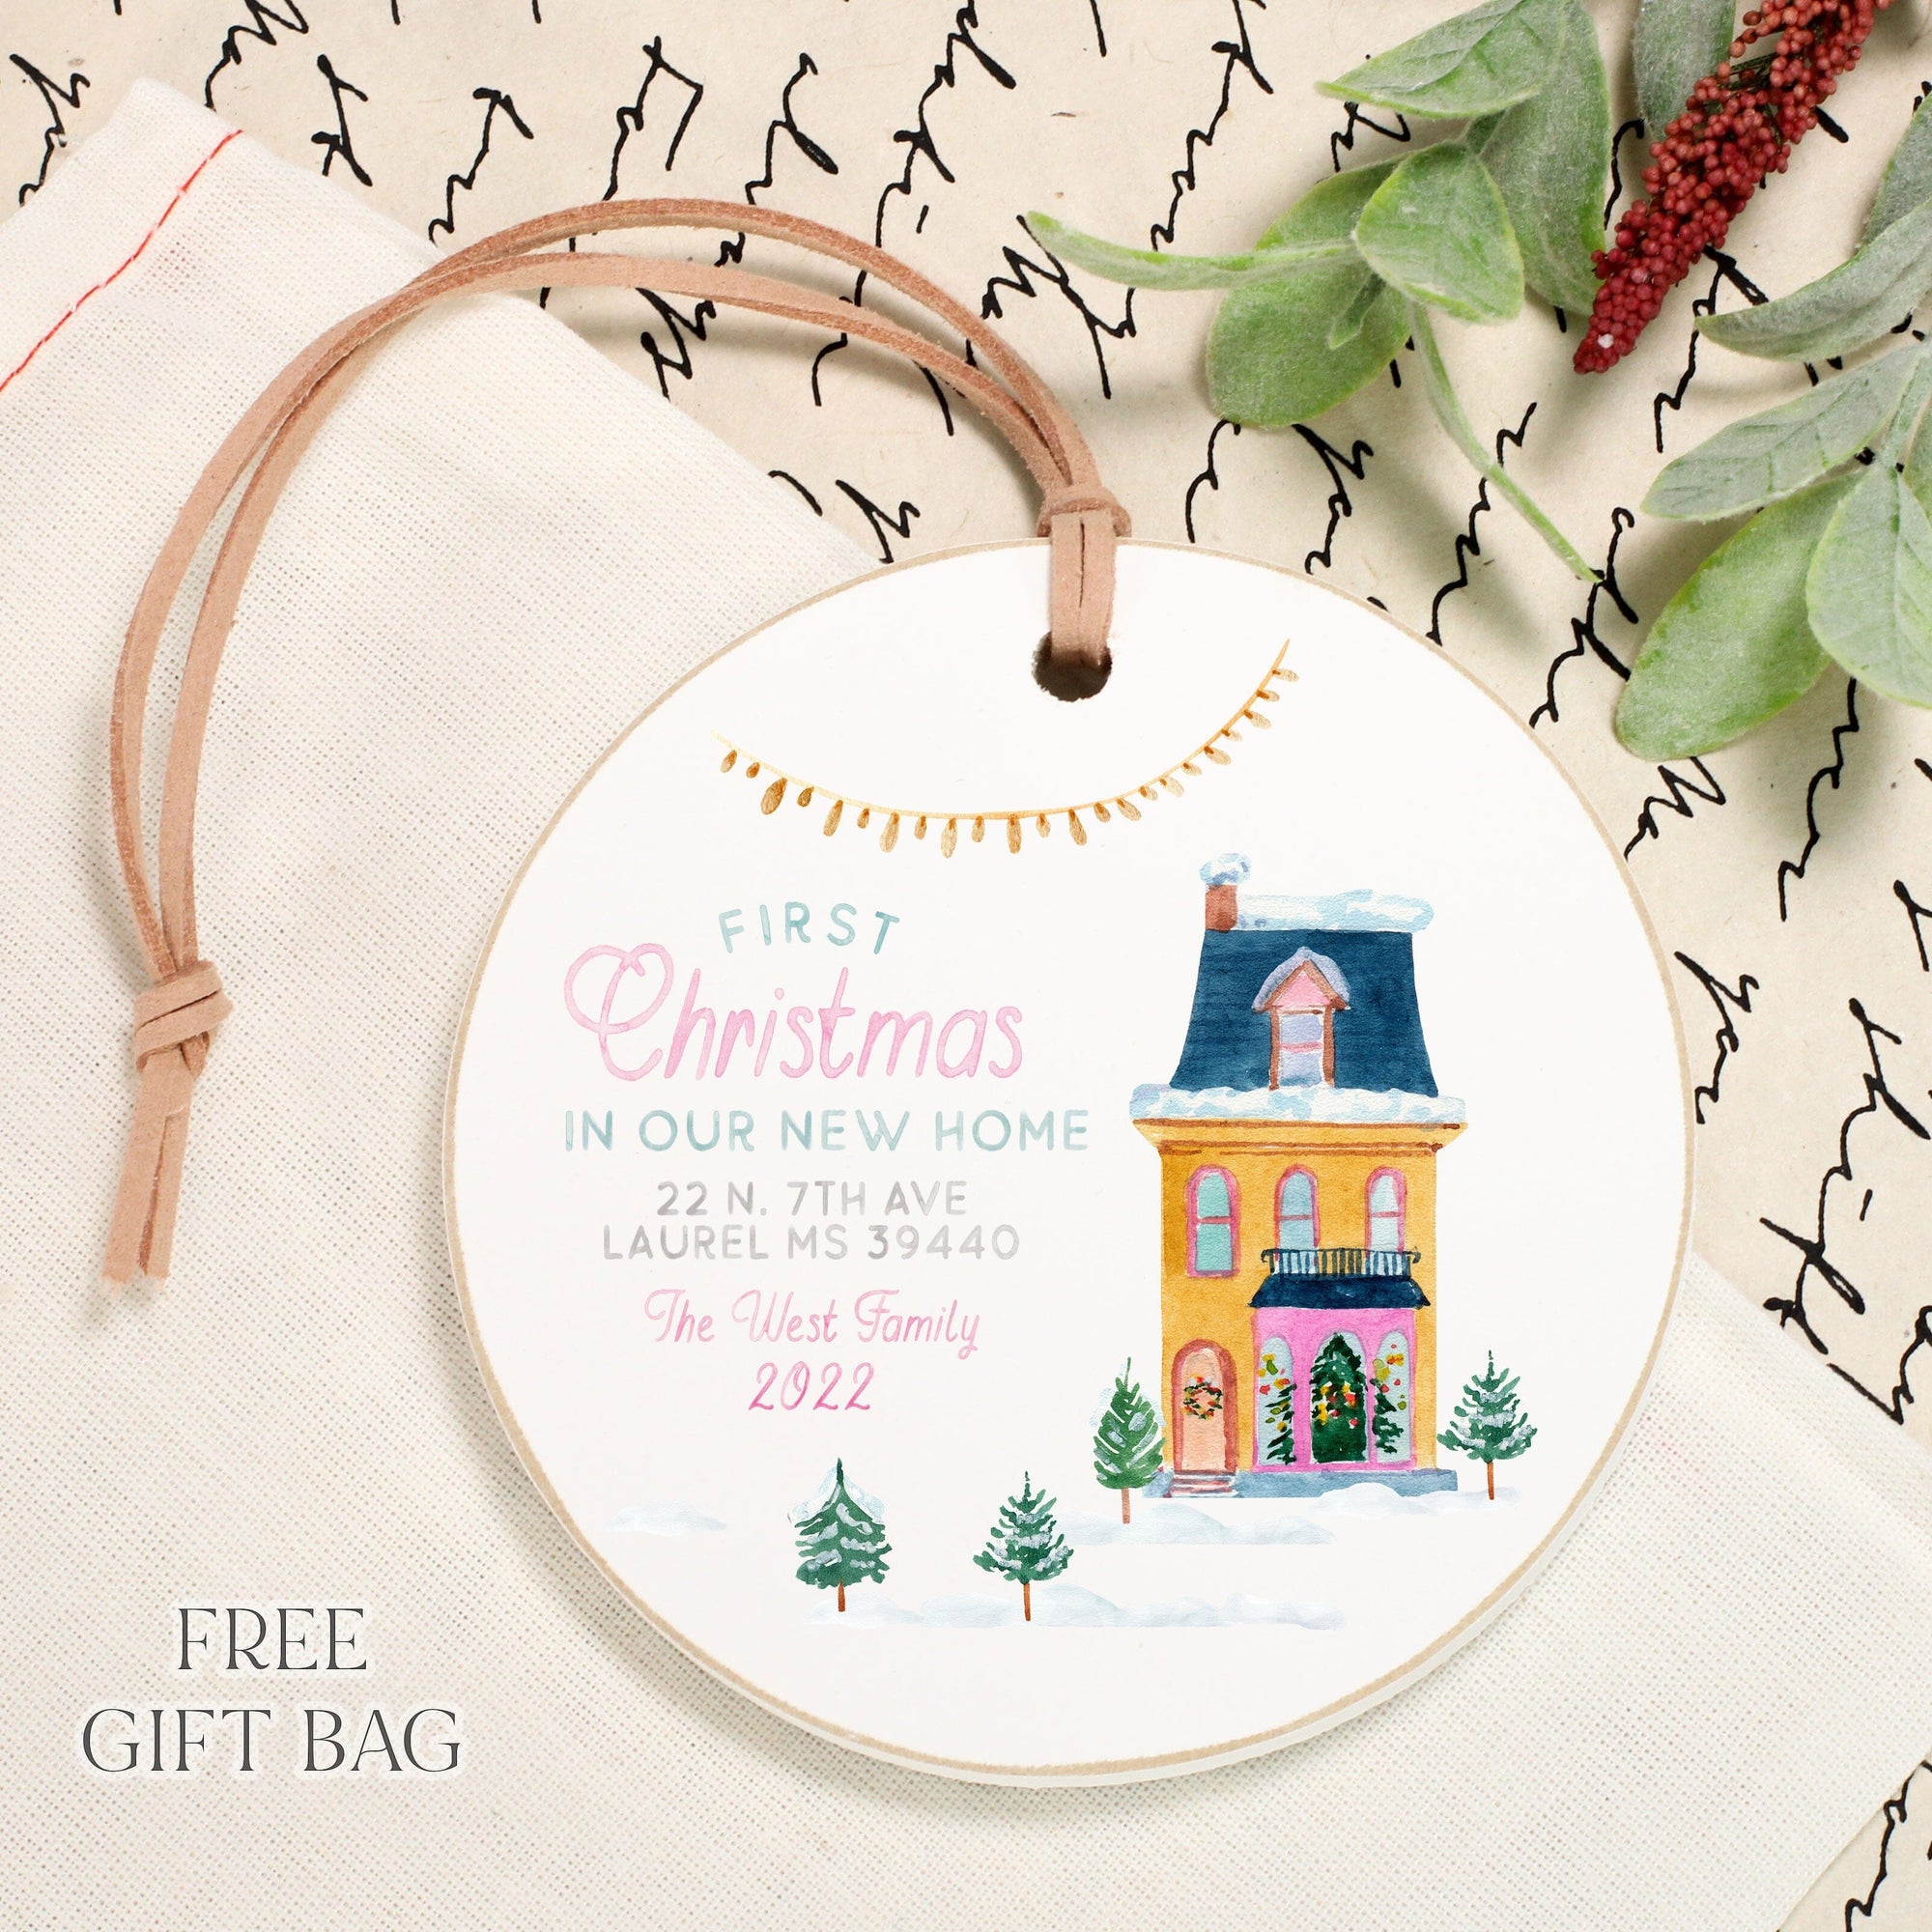 Customizable Ornament | First Christmas in Our New Home Custom Ornament The WAREHOUSE Studio 